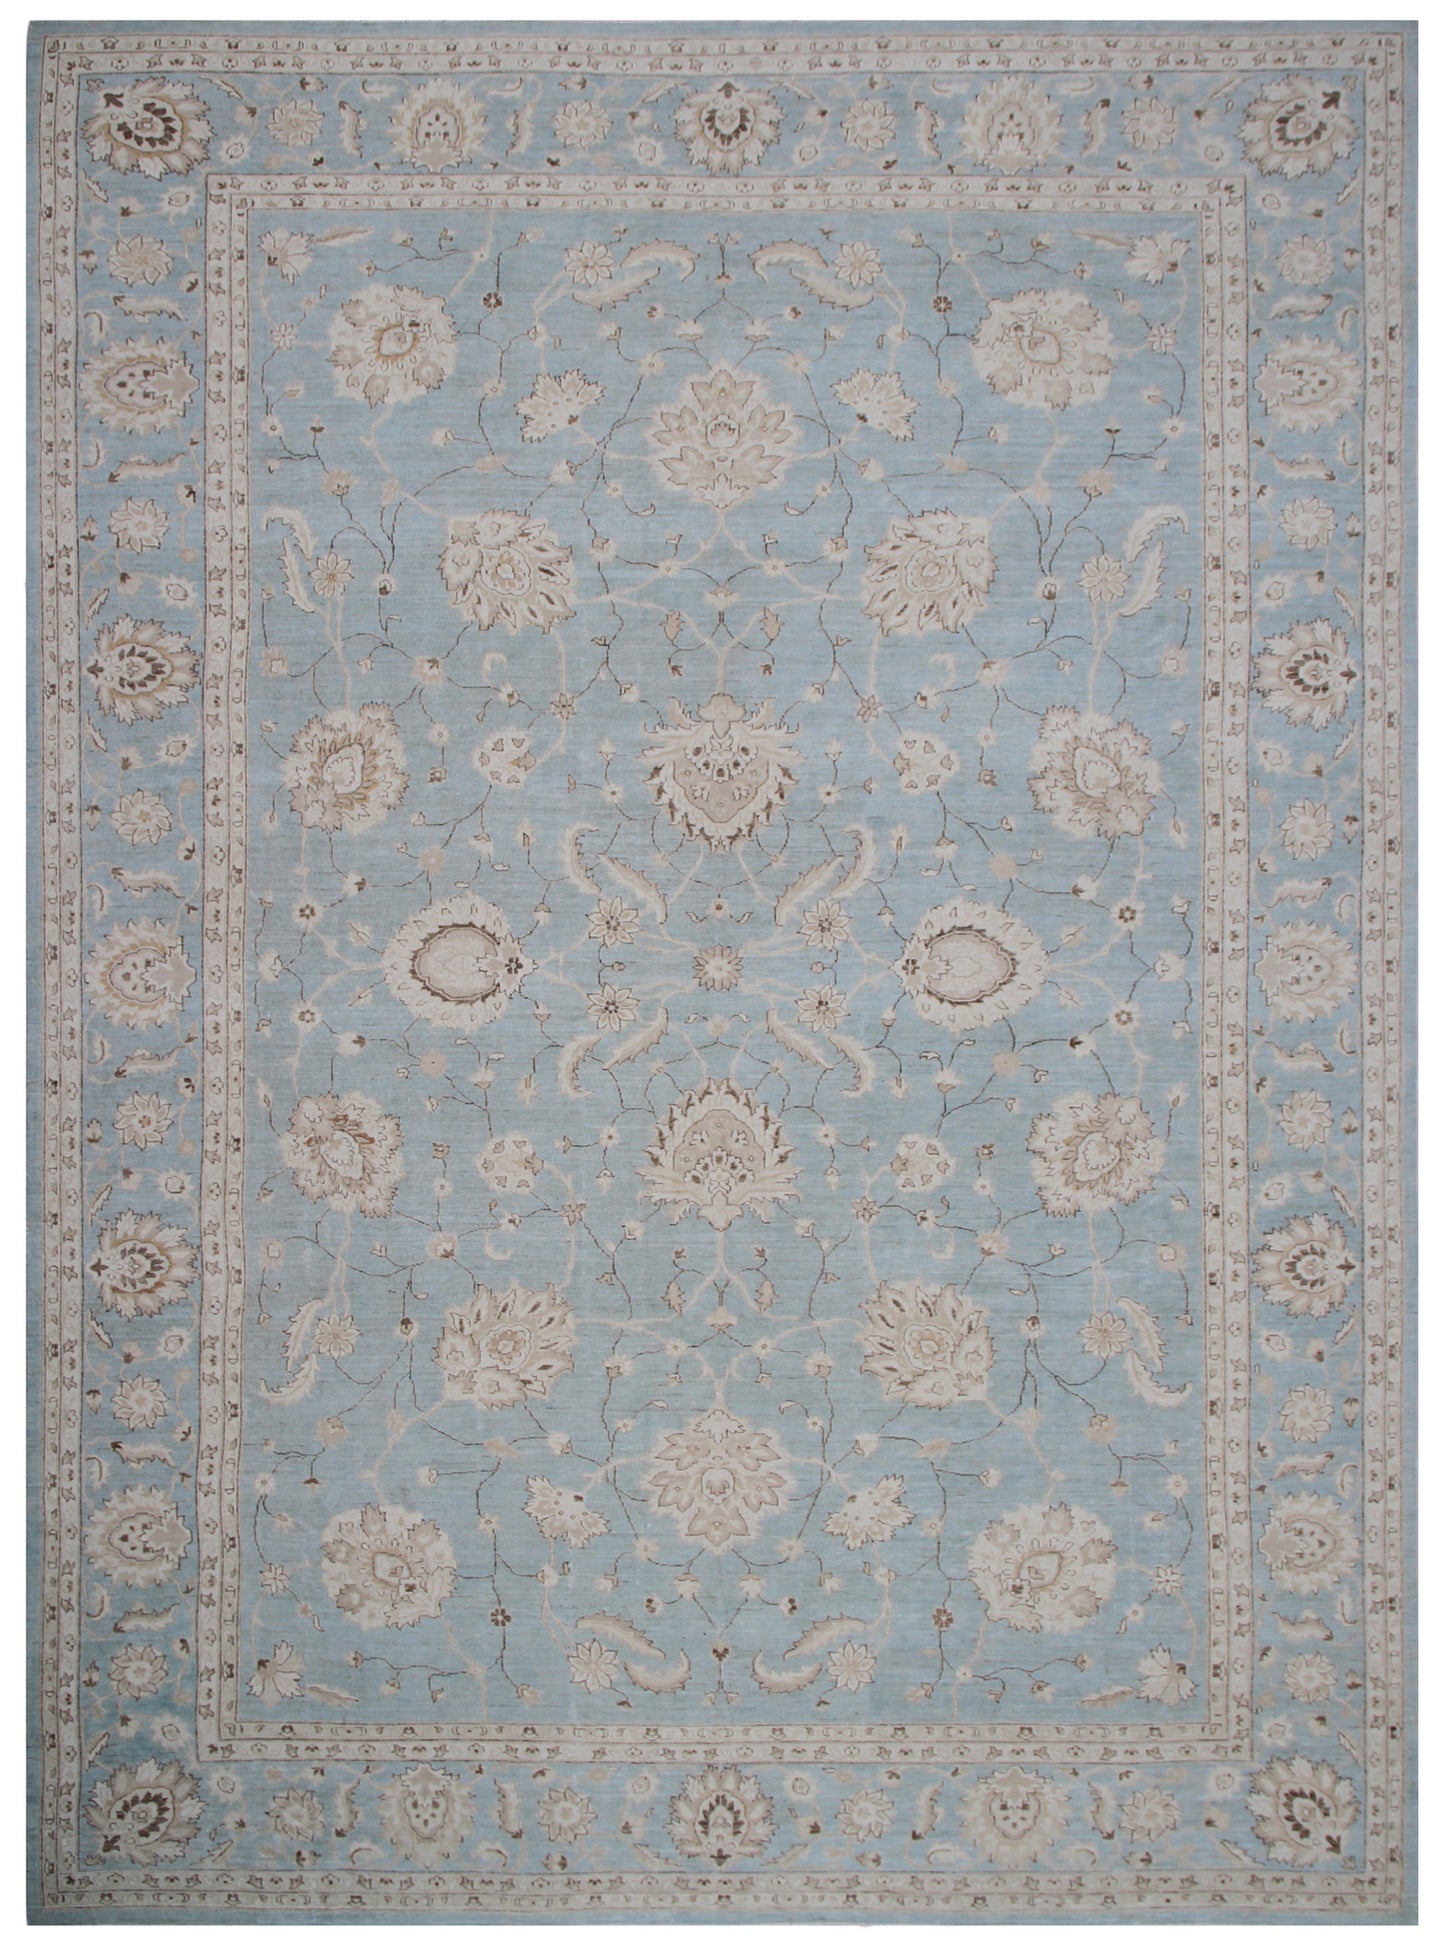 12x17 Large Blue Persian Design Ariana Traditional Rug